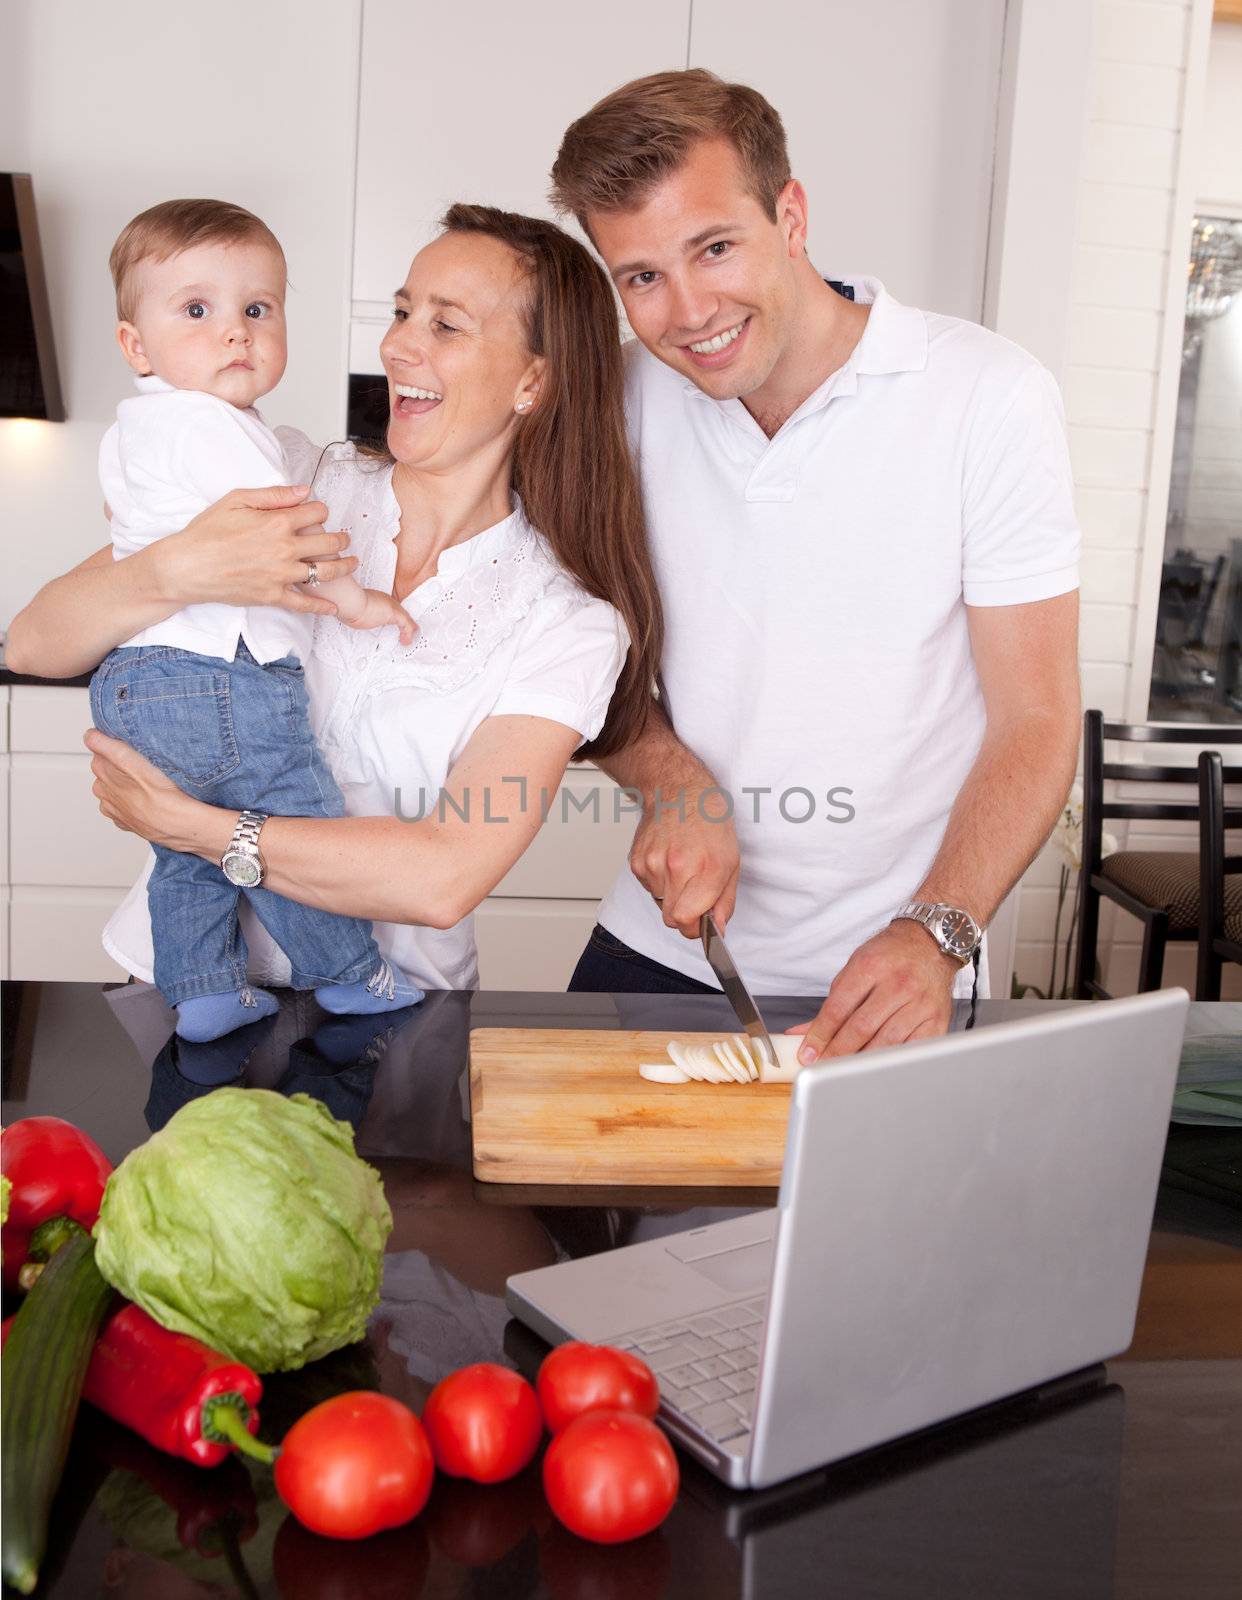 Family Fun in Kitchen by leaf